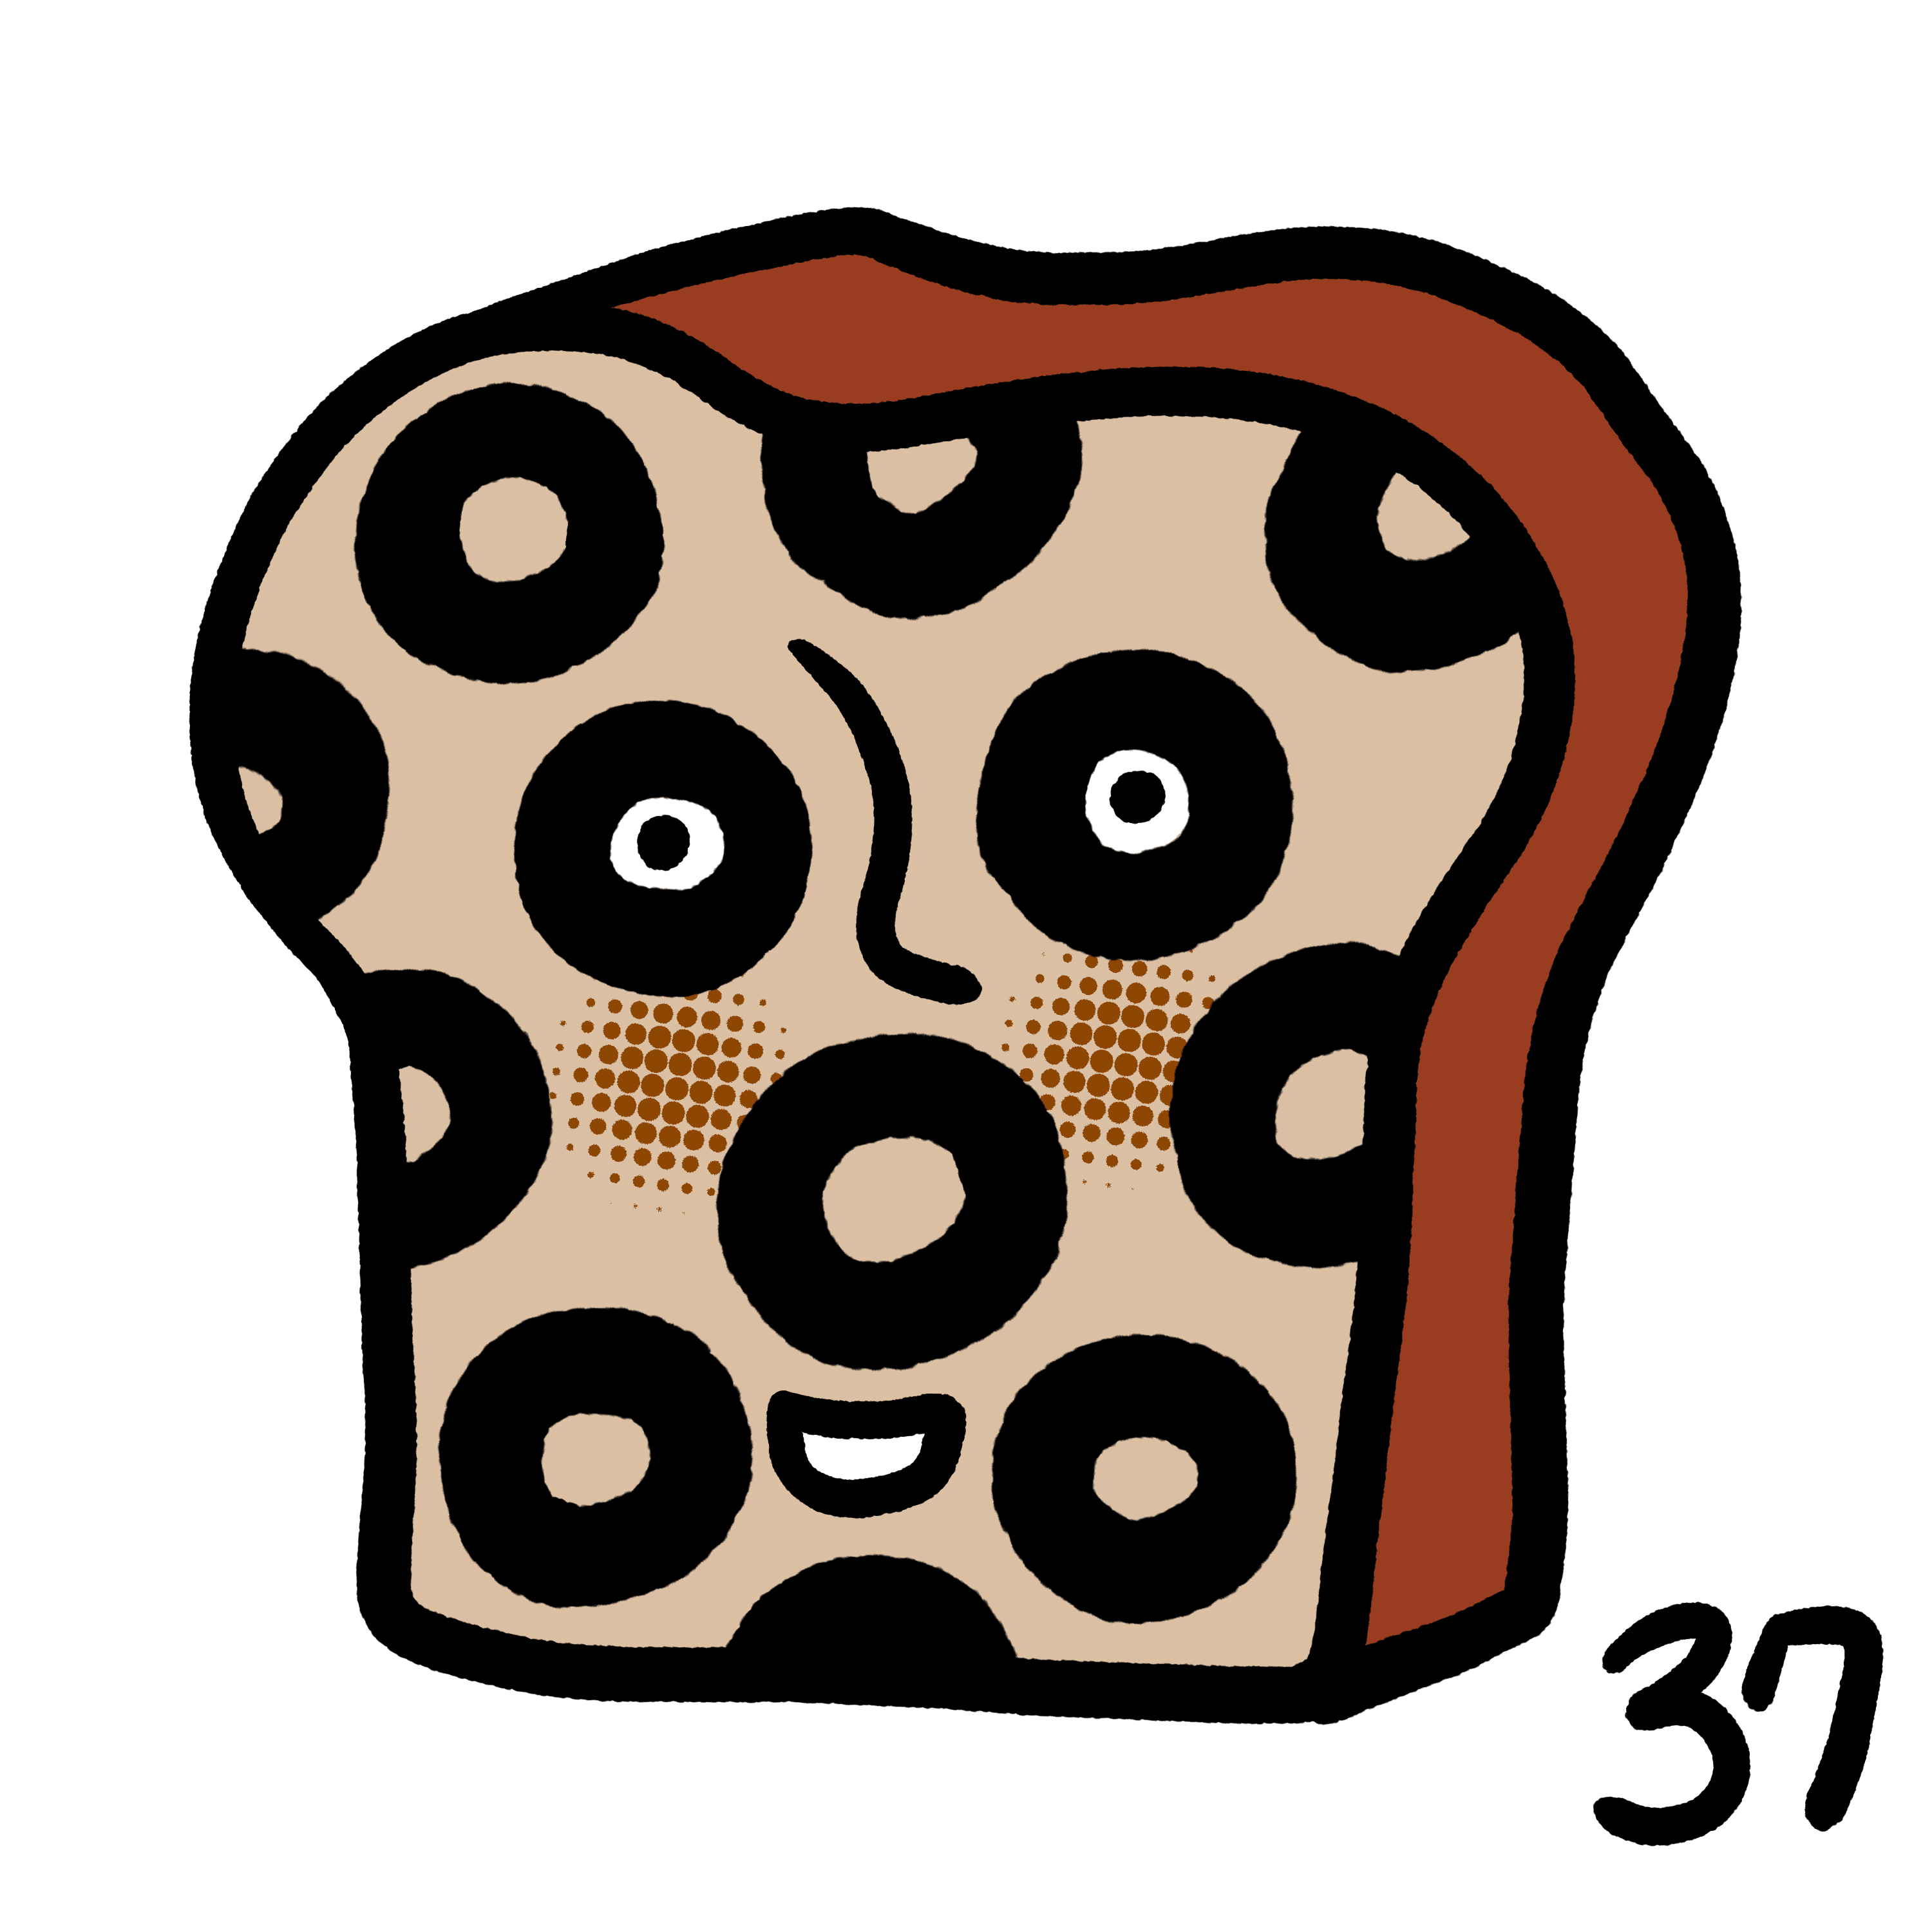 Bread and black olives